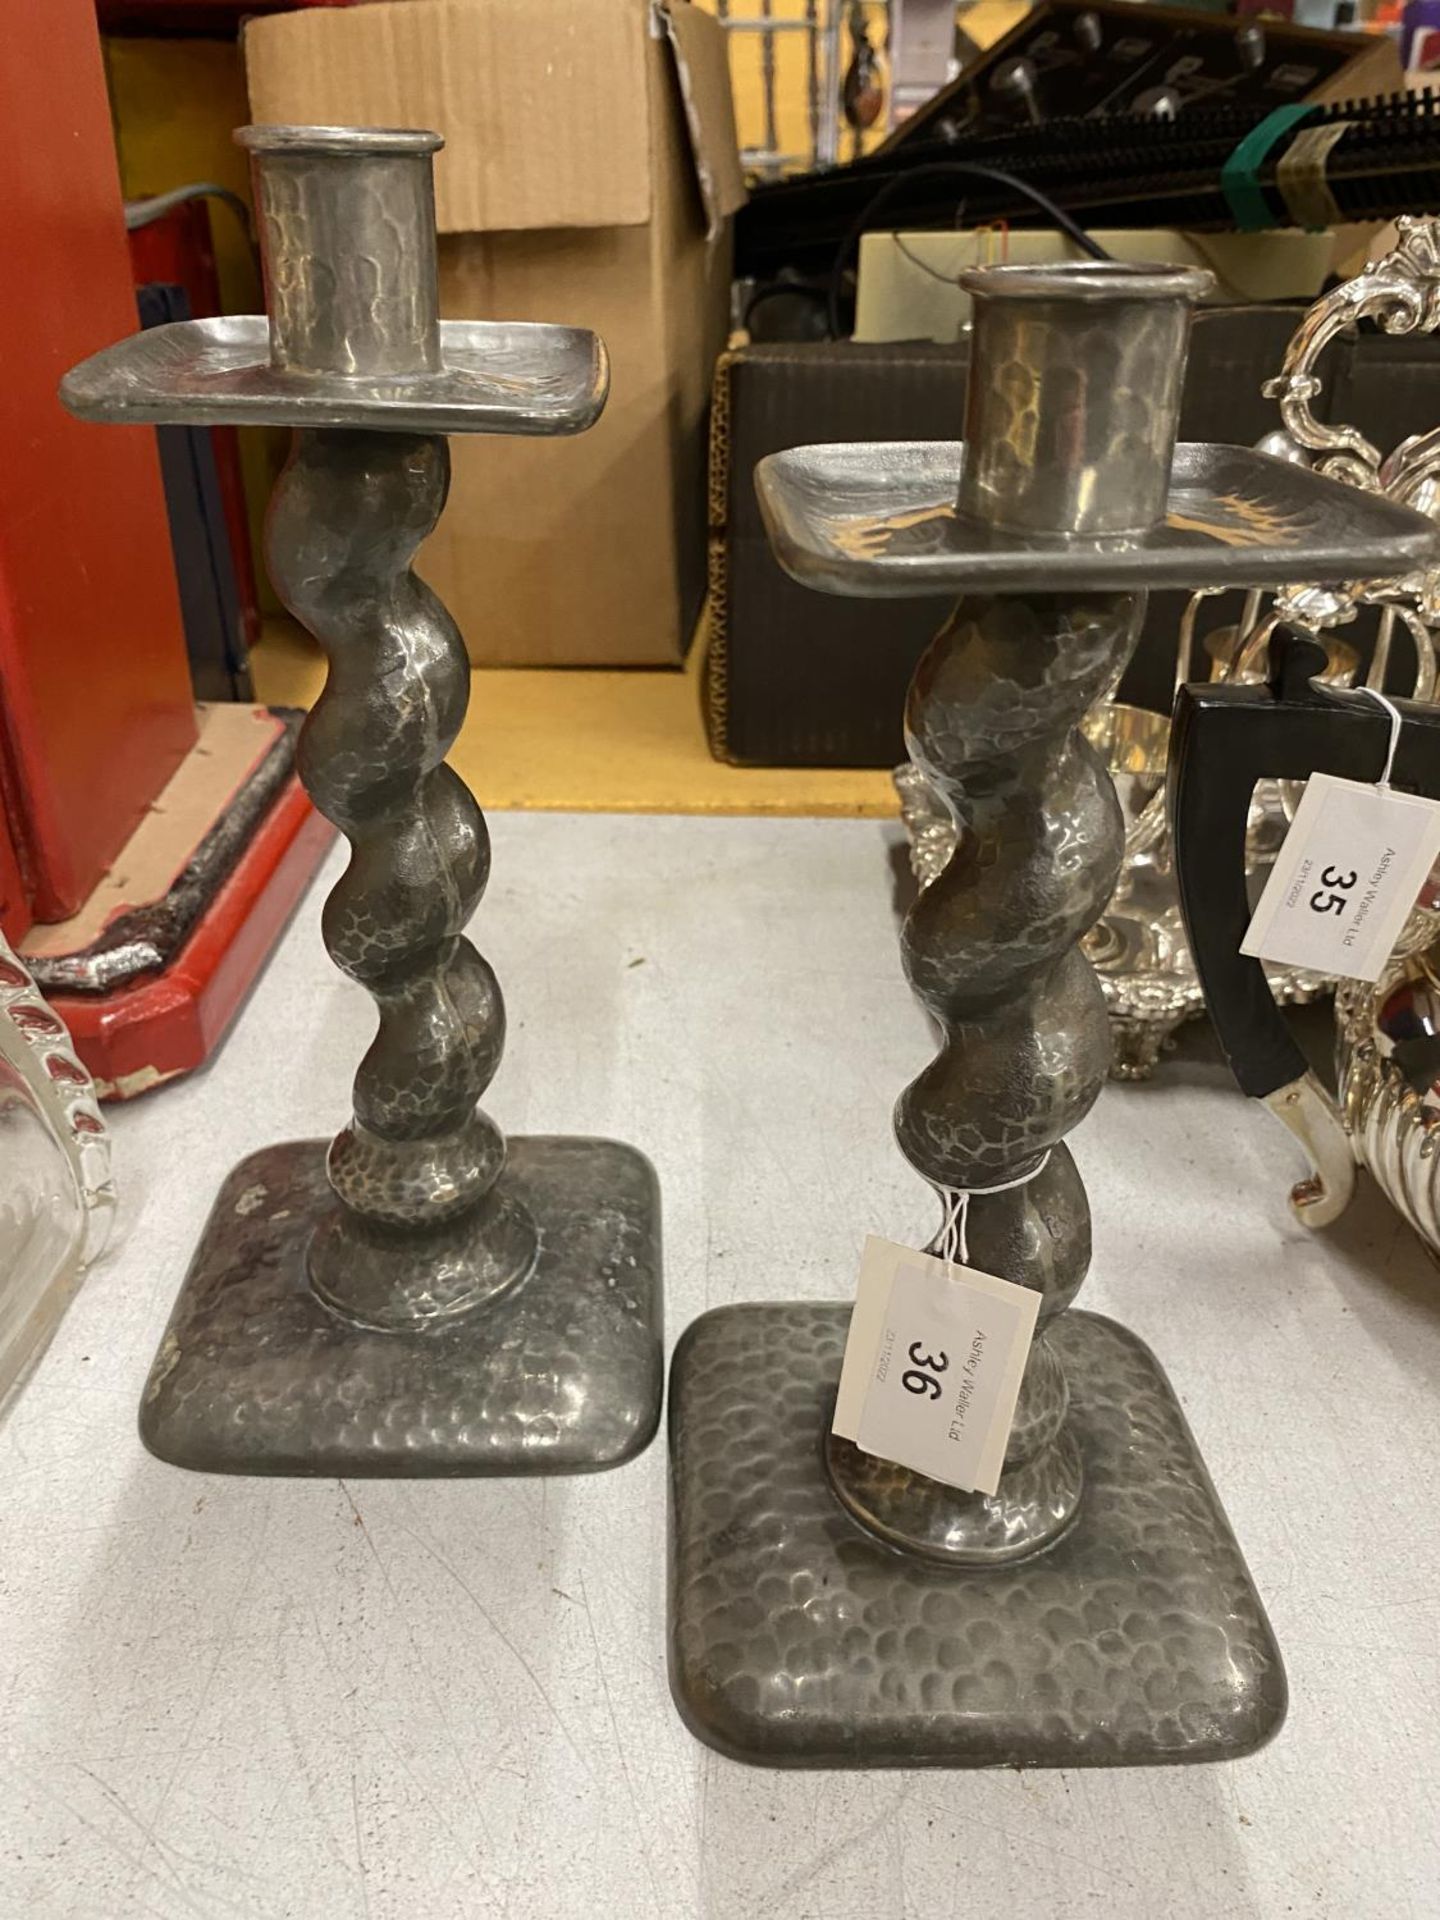 A PAIR OF VINTAGE PEWTER ARTS & CRAFTS CANDLESTICKS WITH TWISTED STEM DESIGN